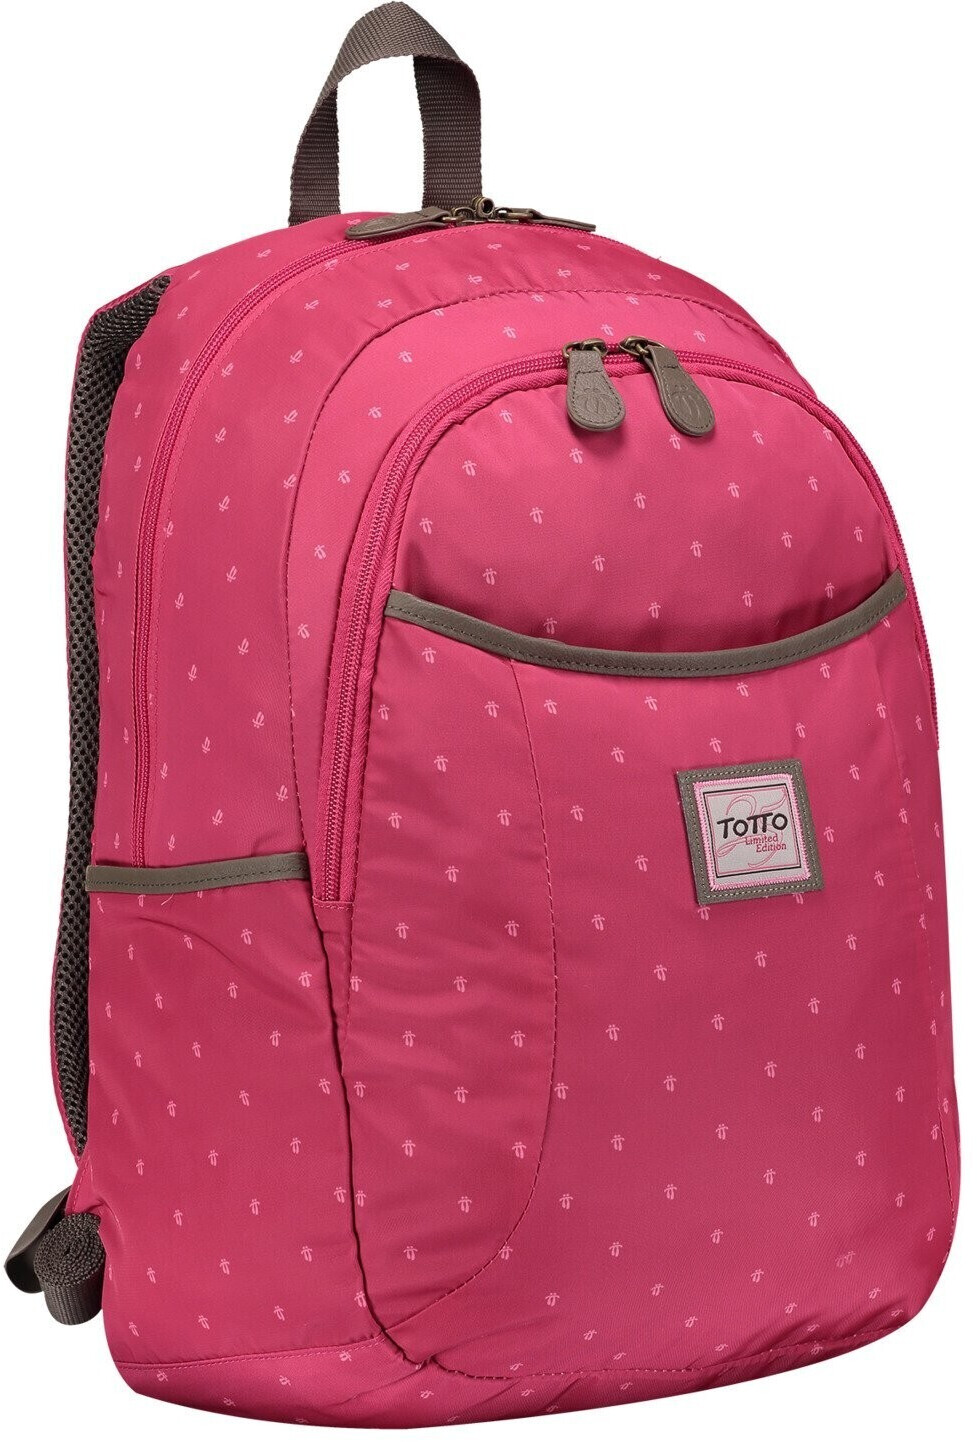 Buy Totto Tumer One (MA04SYM003) pink from £34.99 (Today) – Best Deals ...